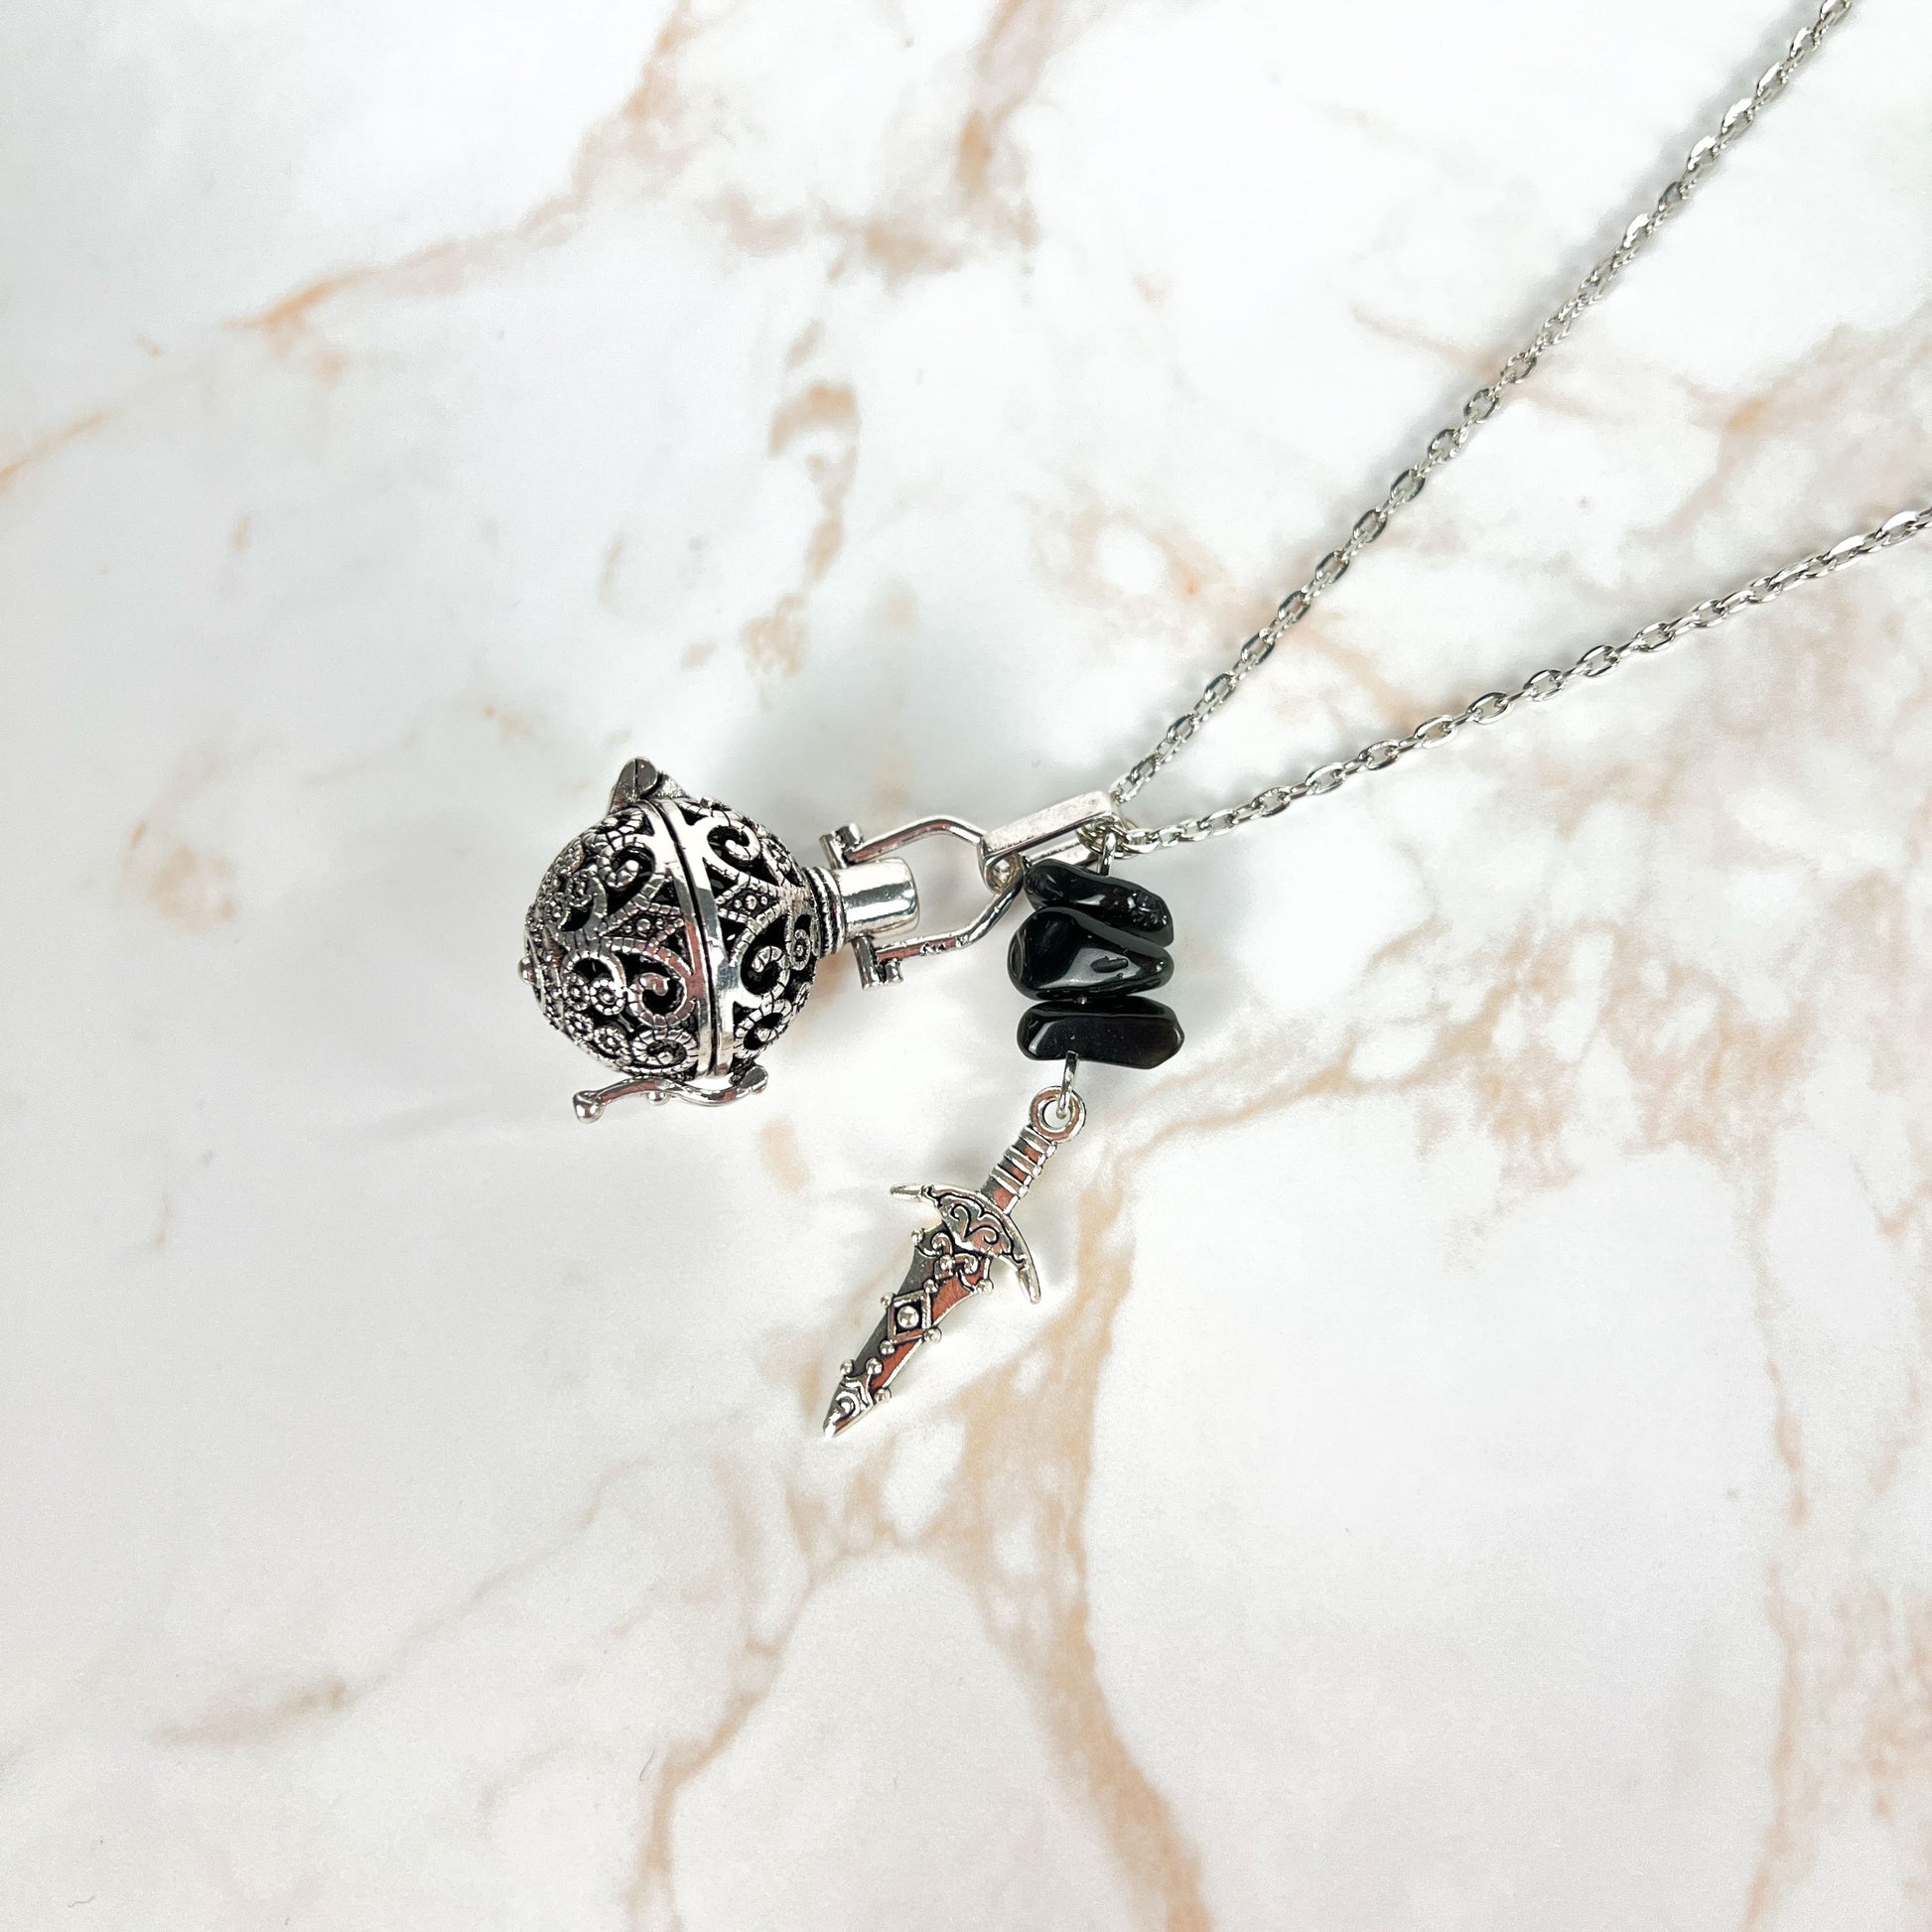 Onyx locket necklace with obsidian beads and a dagger charm Baguette Magick